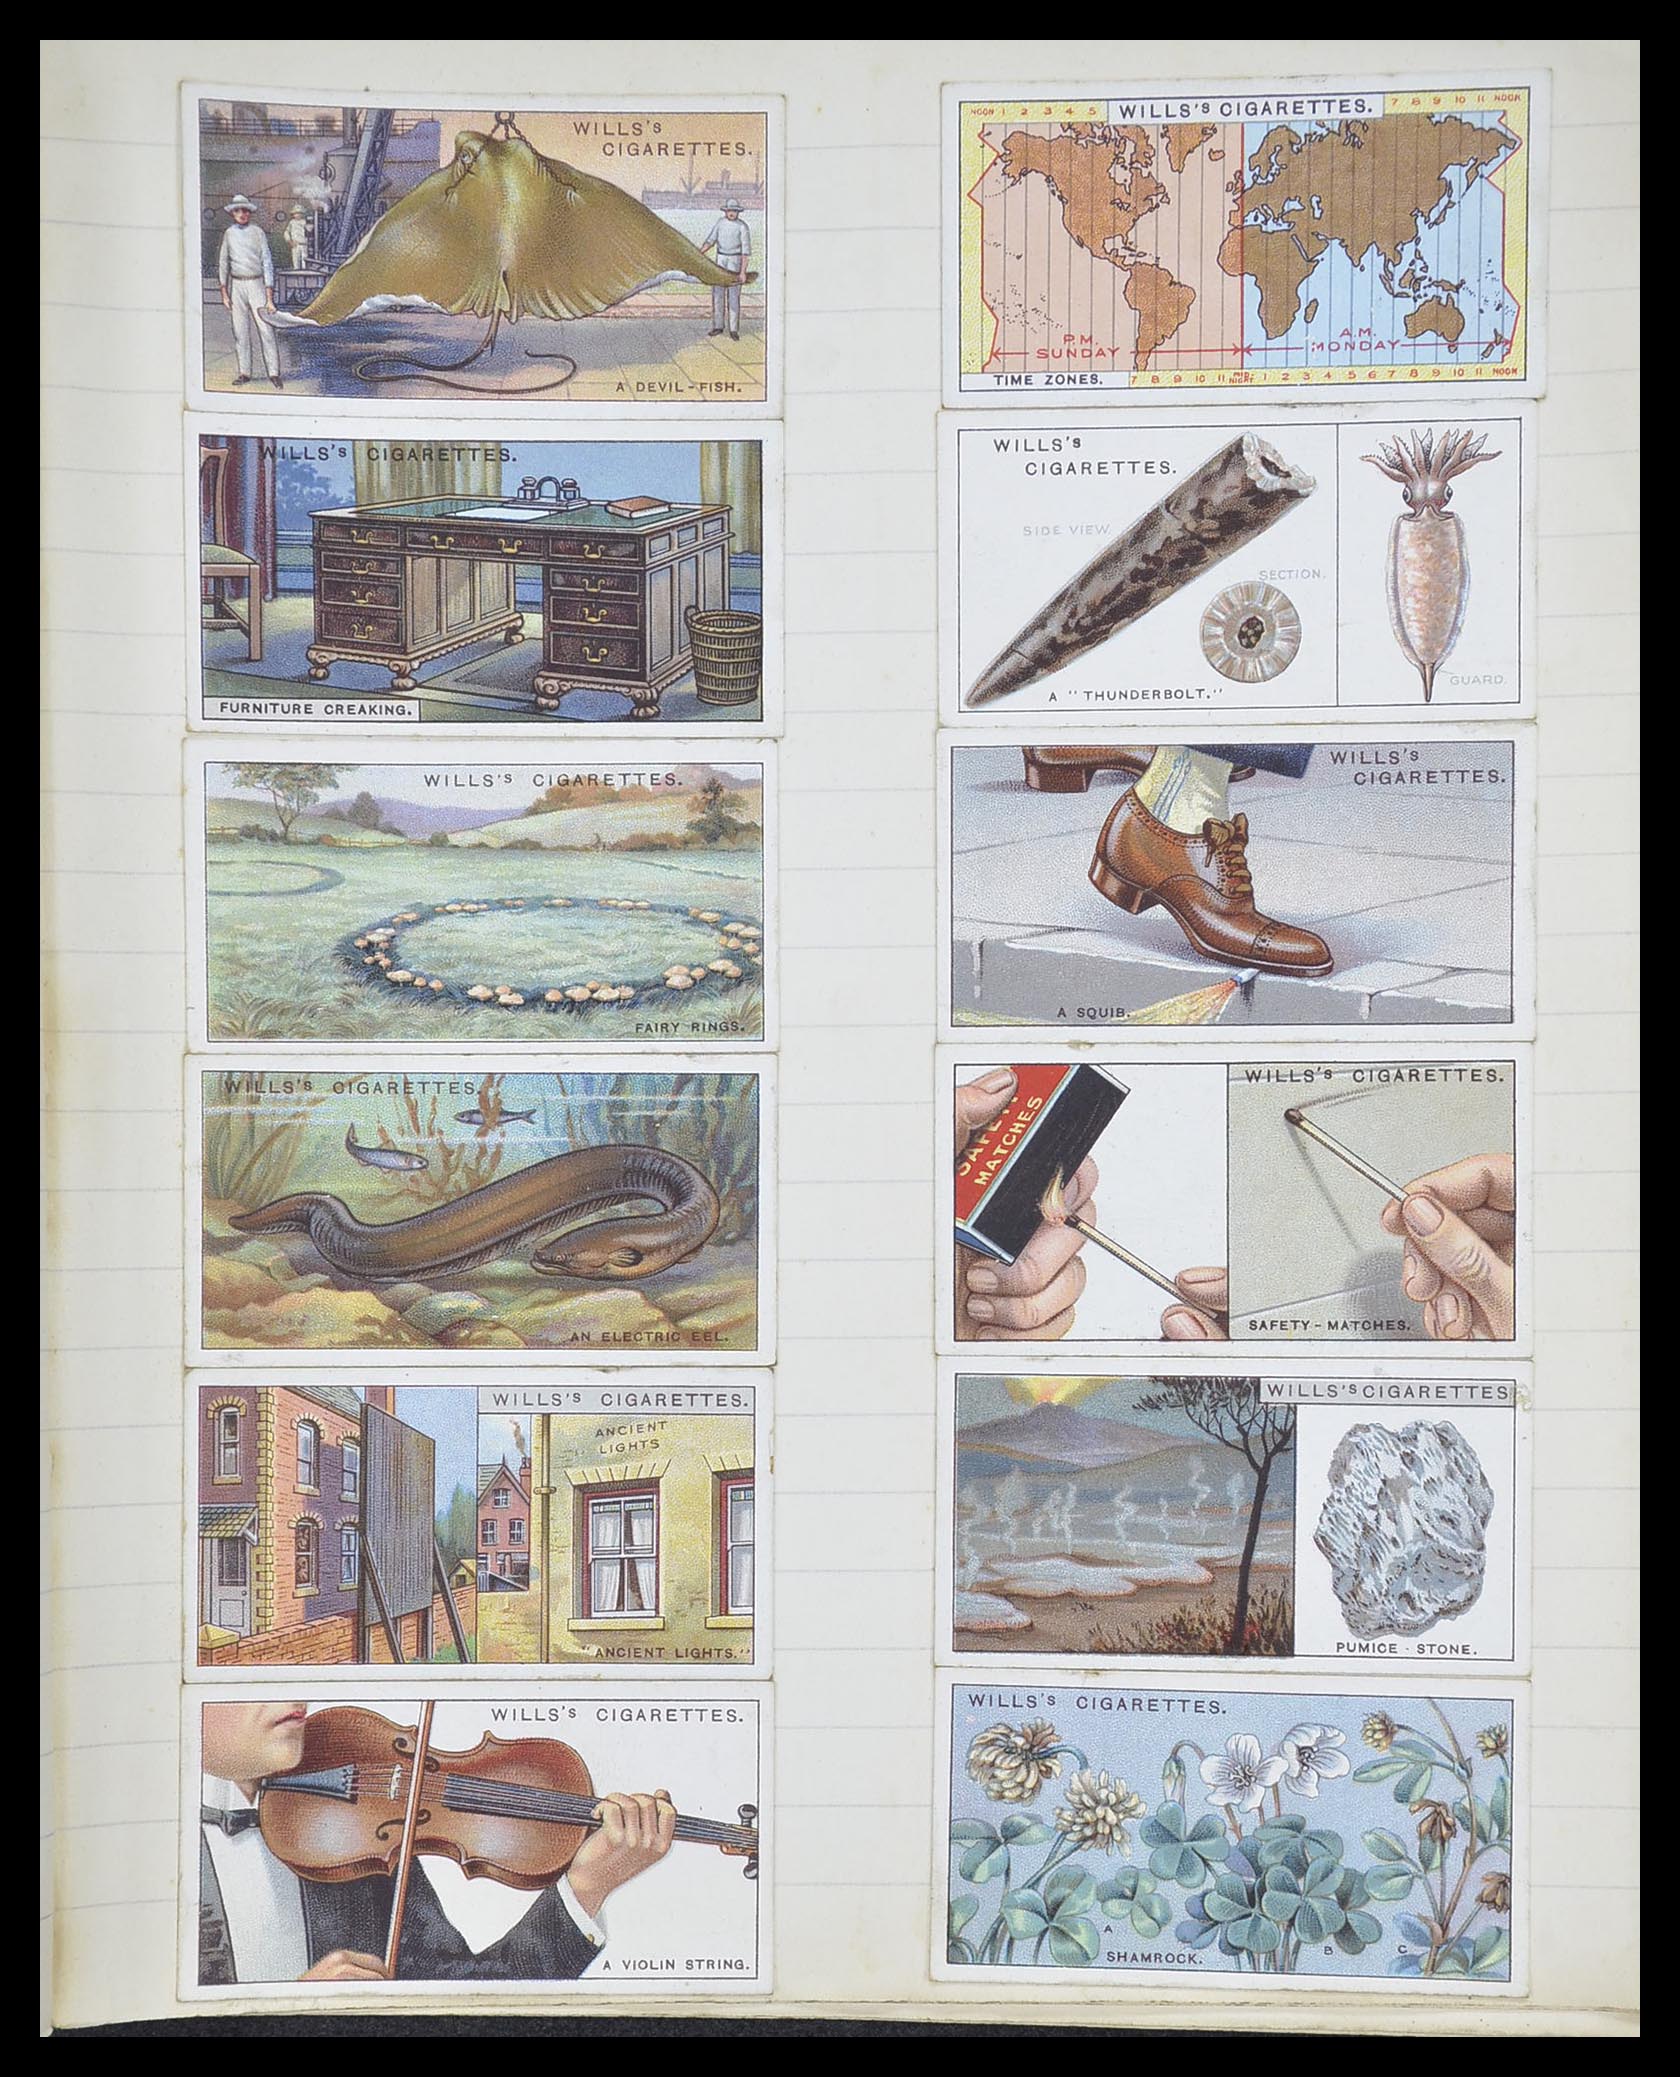 33444 120 - Stamp collection 33444 Great Britain cigarette cards.